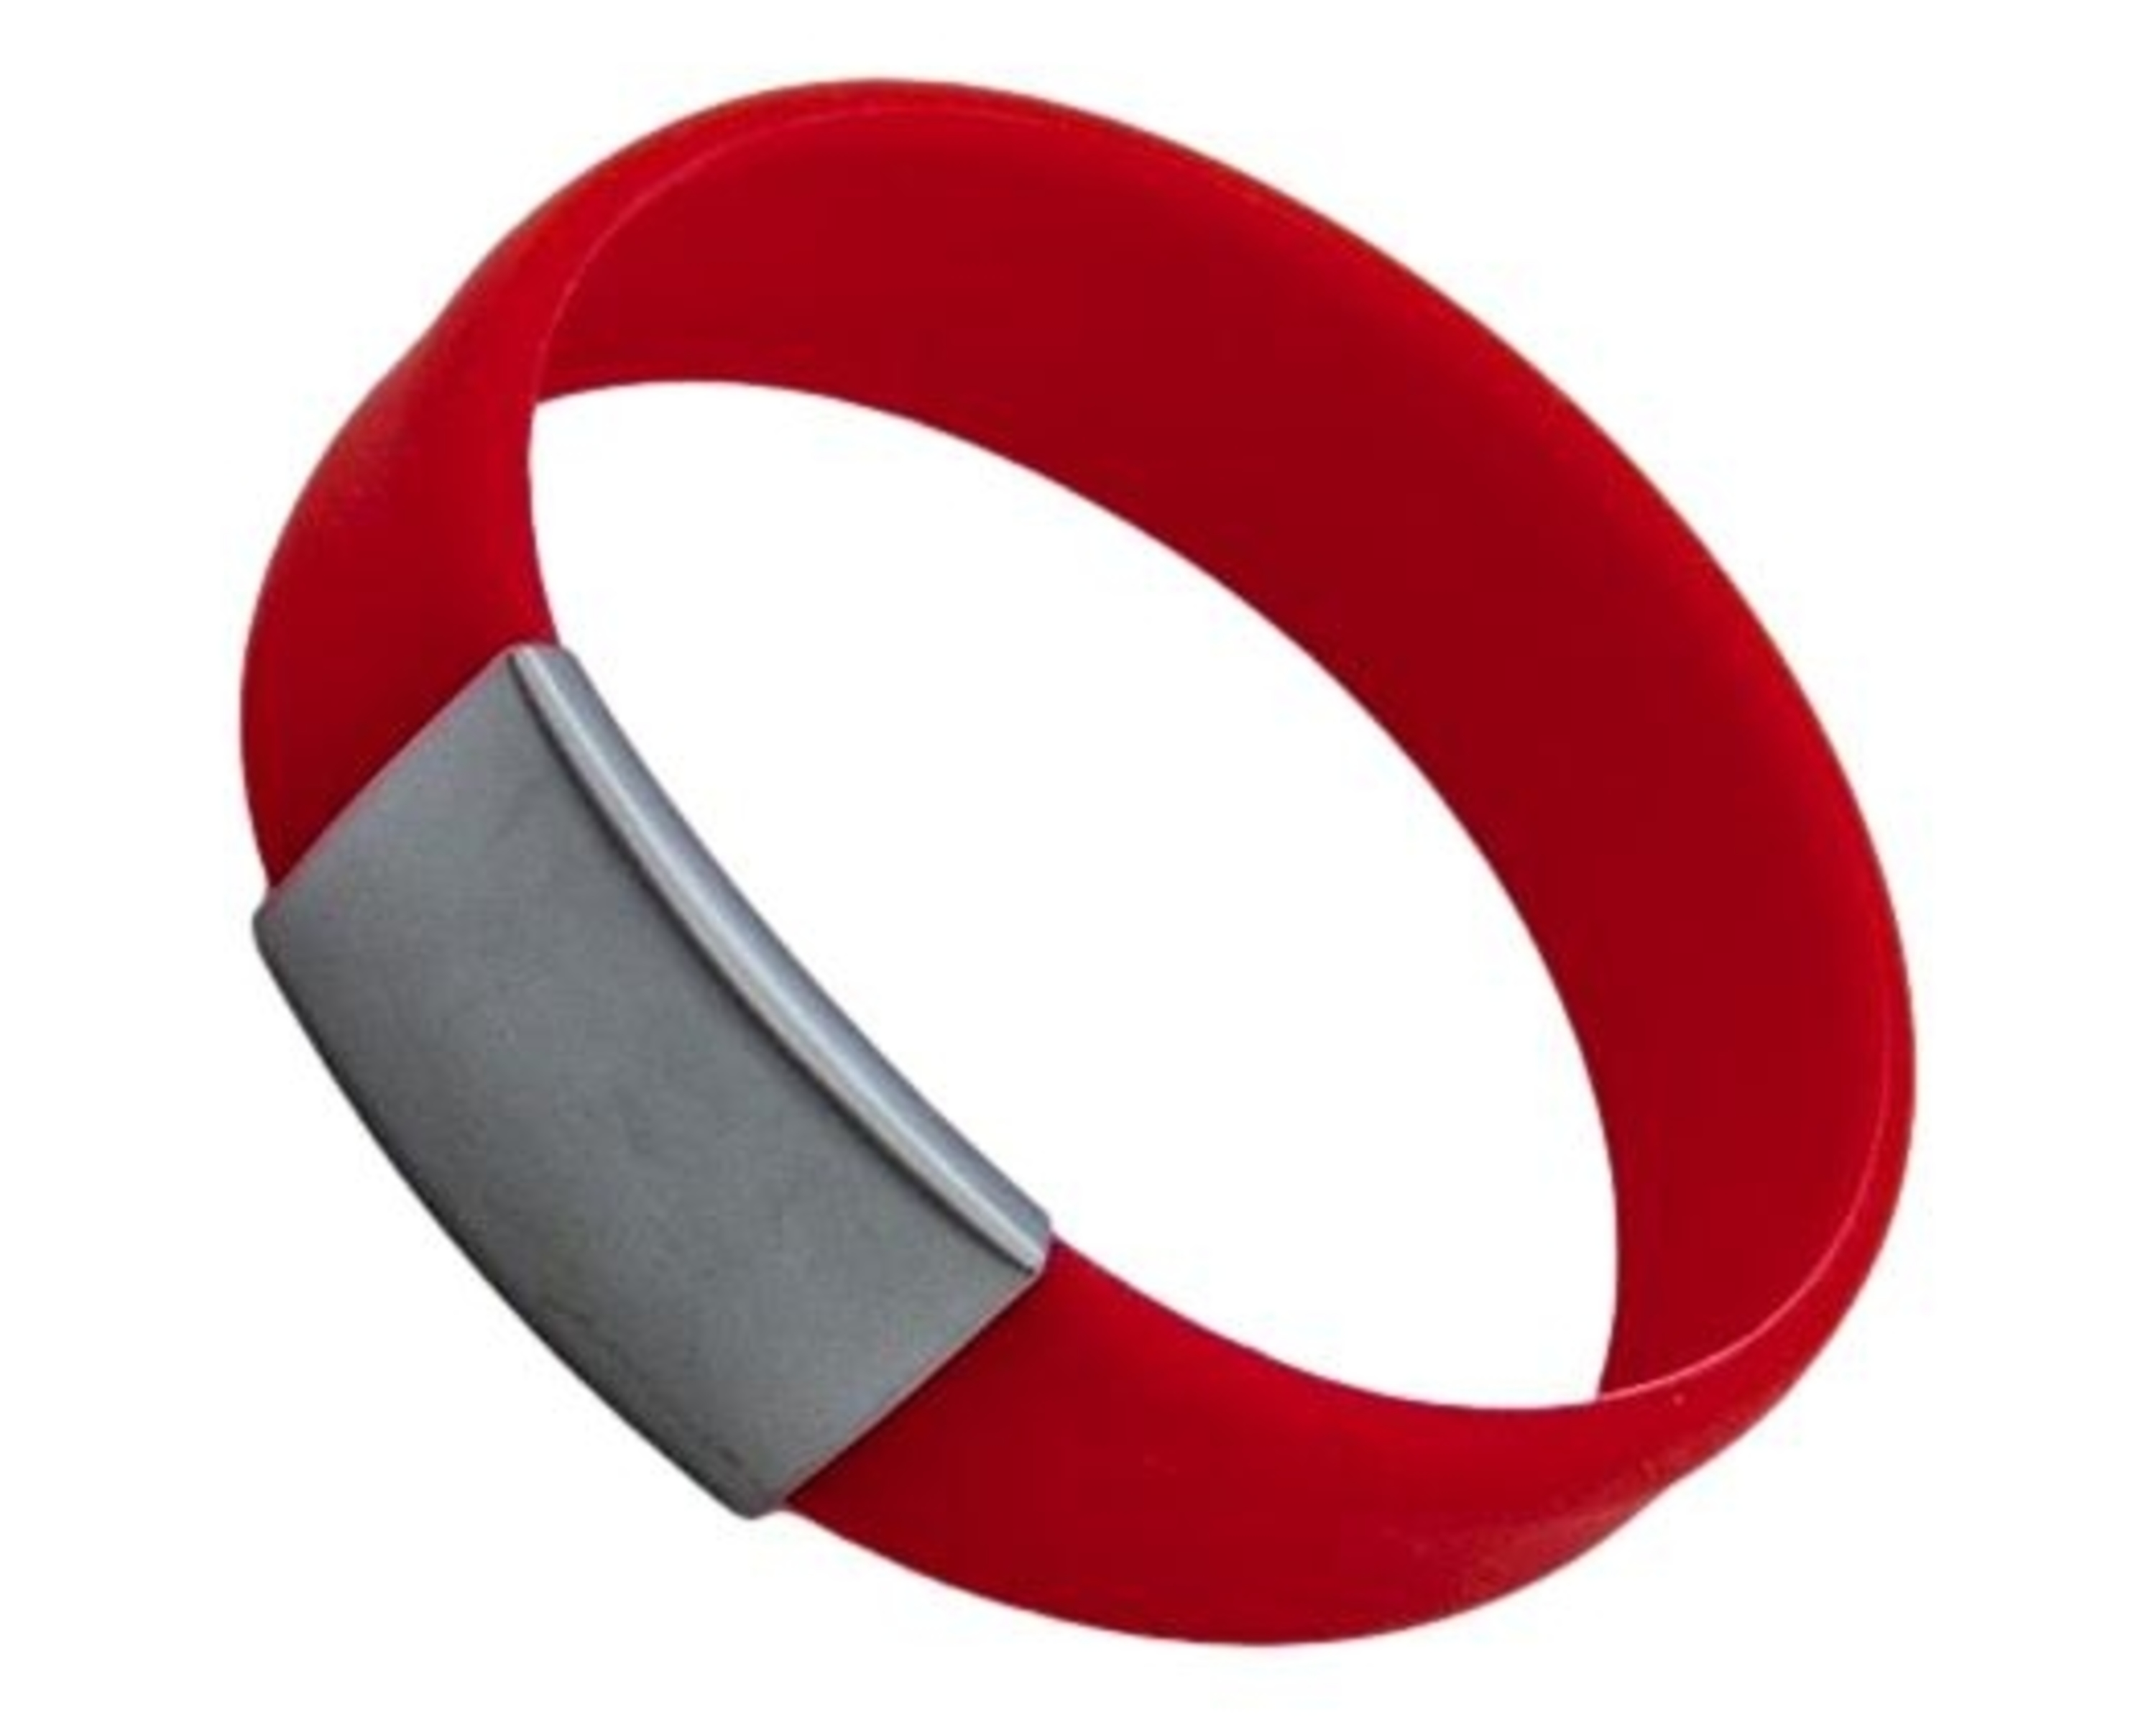 Amazon.com : Personalized Silicone Wristbands Bulk with Text Message Custom Rubber  Bracelets Customized Rubber Band Bracelets for Events,  Motivation,Fundraisers, Awareness,Red : Office Products